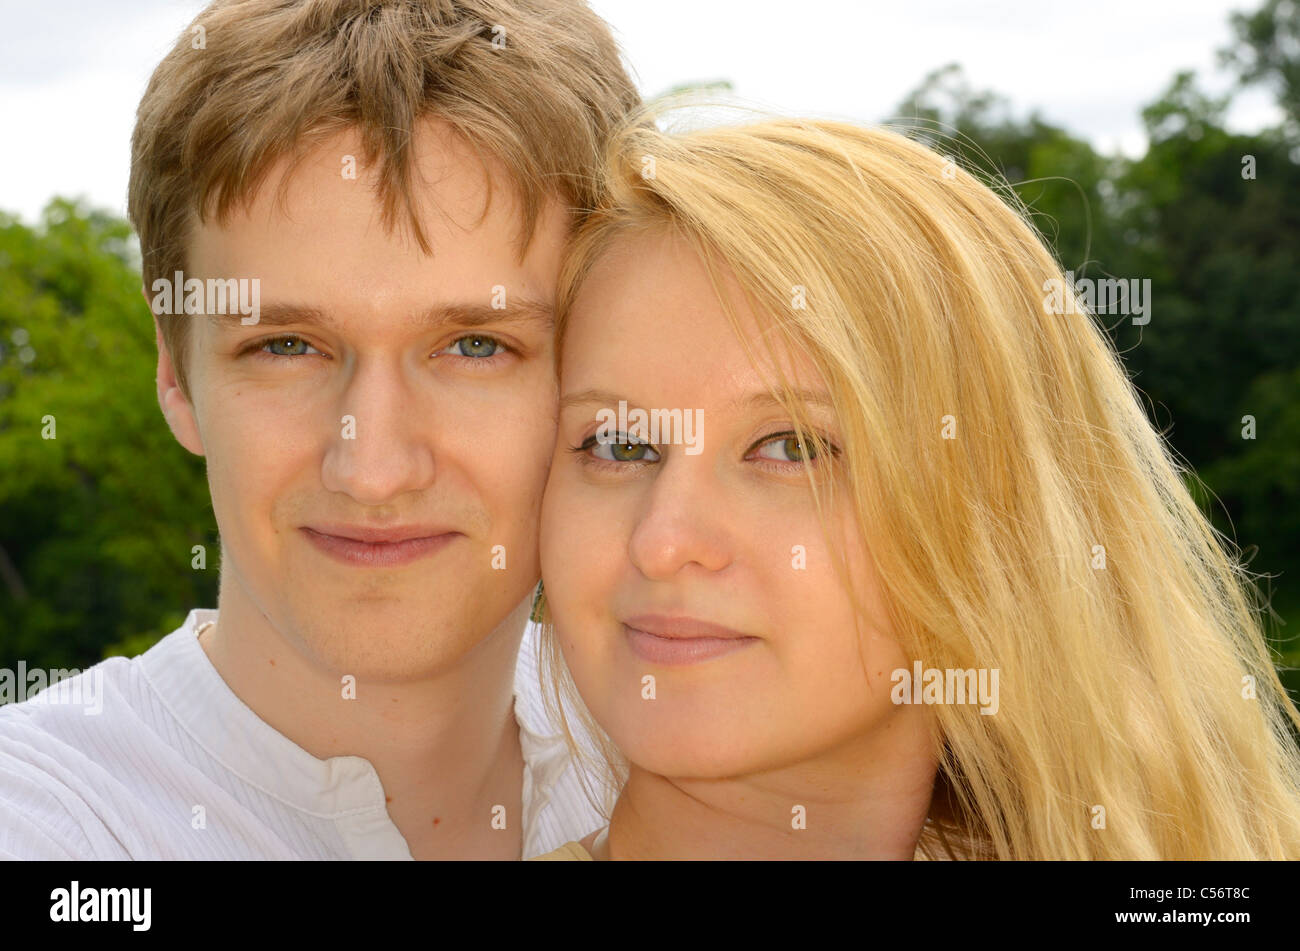 Faces of cheek to cheek loving couple of white Eastern European descent Stock Photo